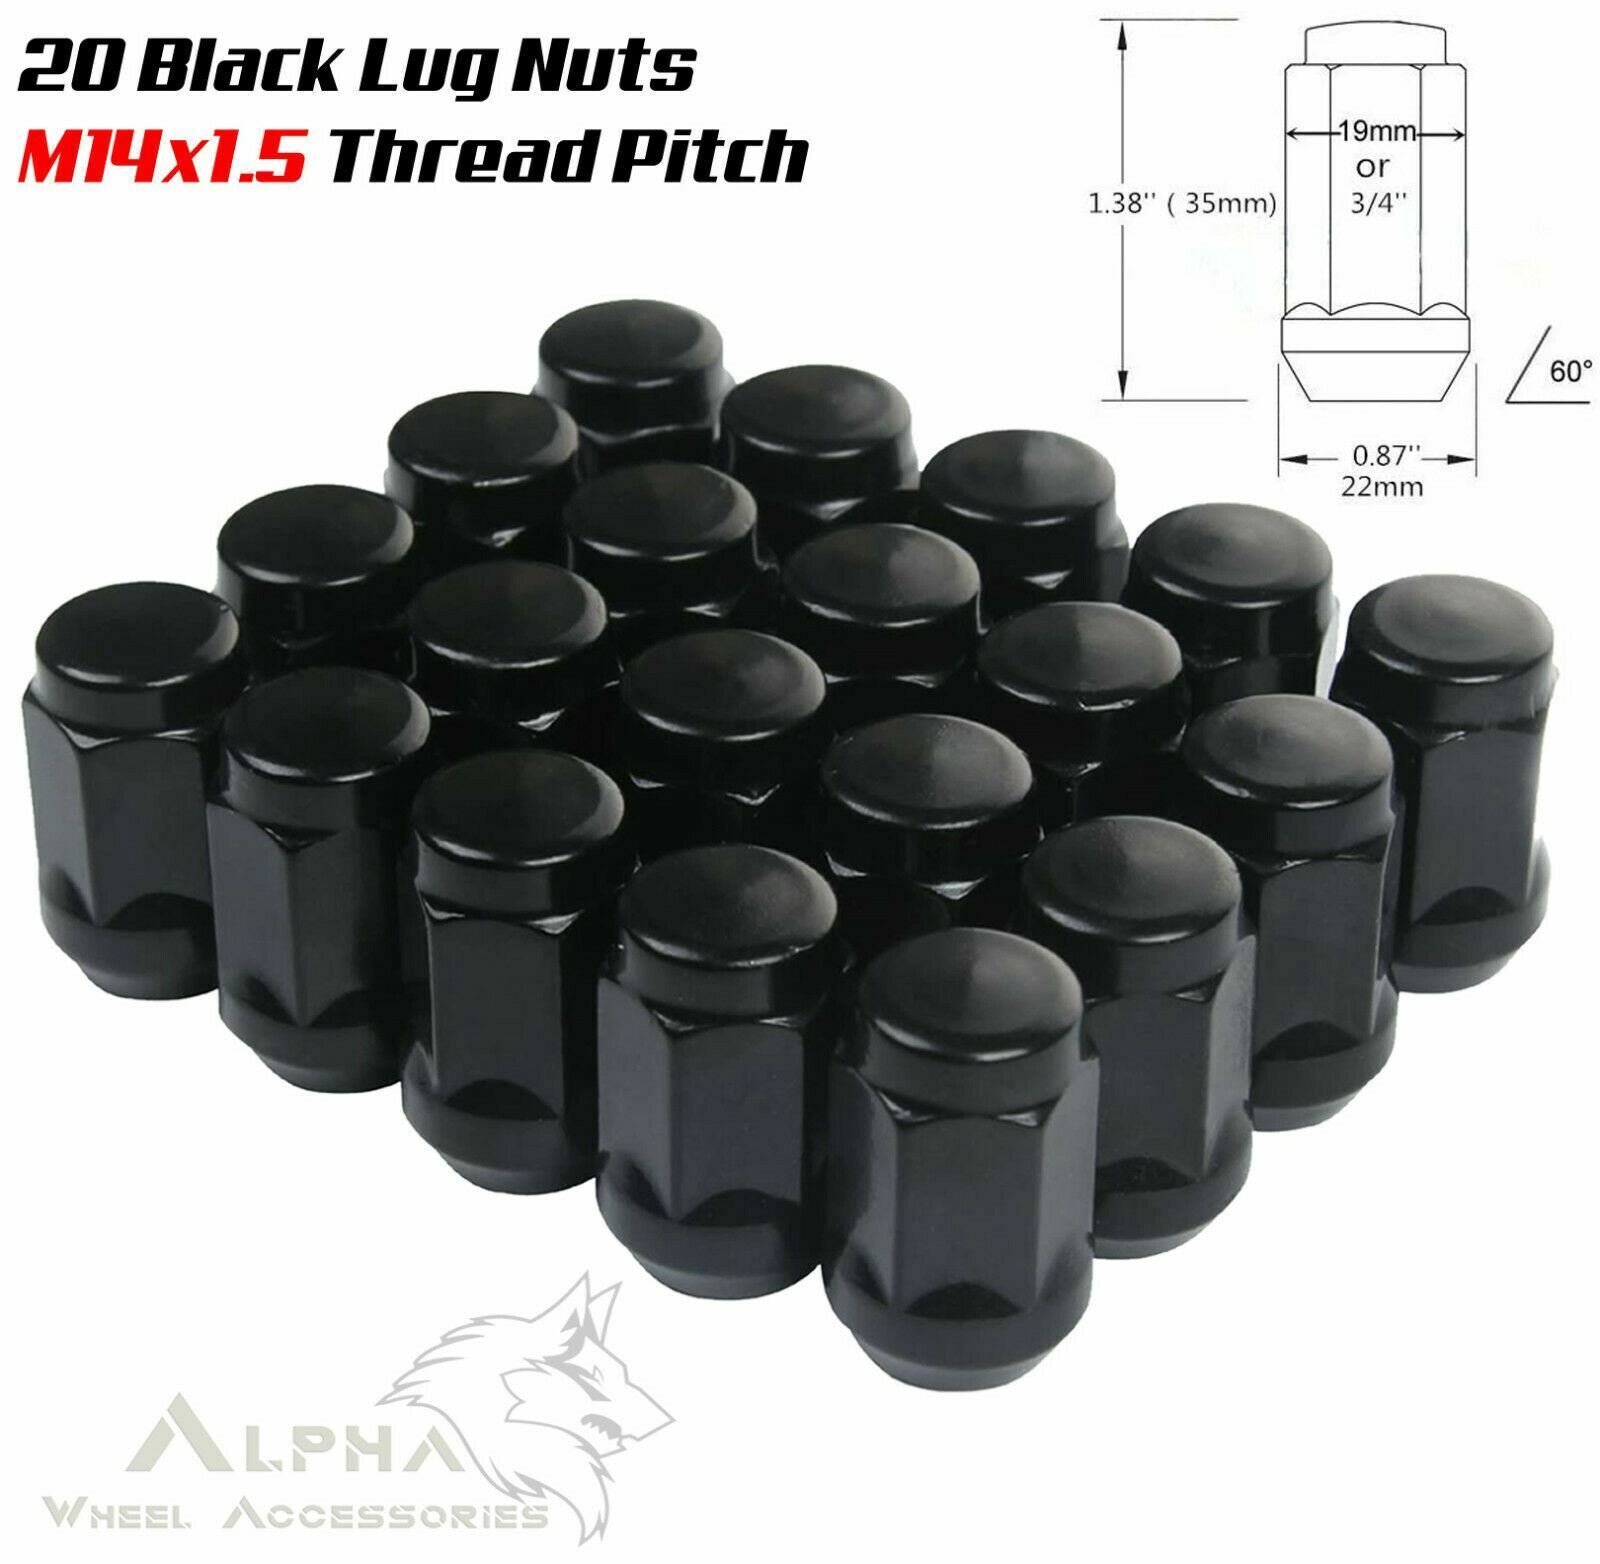 20 Black Lug Nuts 14x1.5 For 2011 and Newer Jeep Grand Cherokee SRT8 Trailhawk